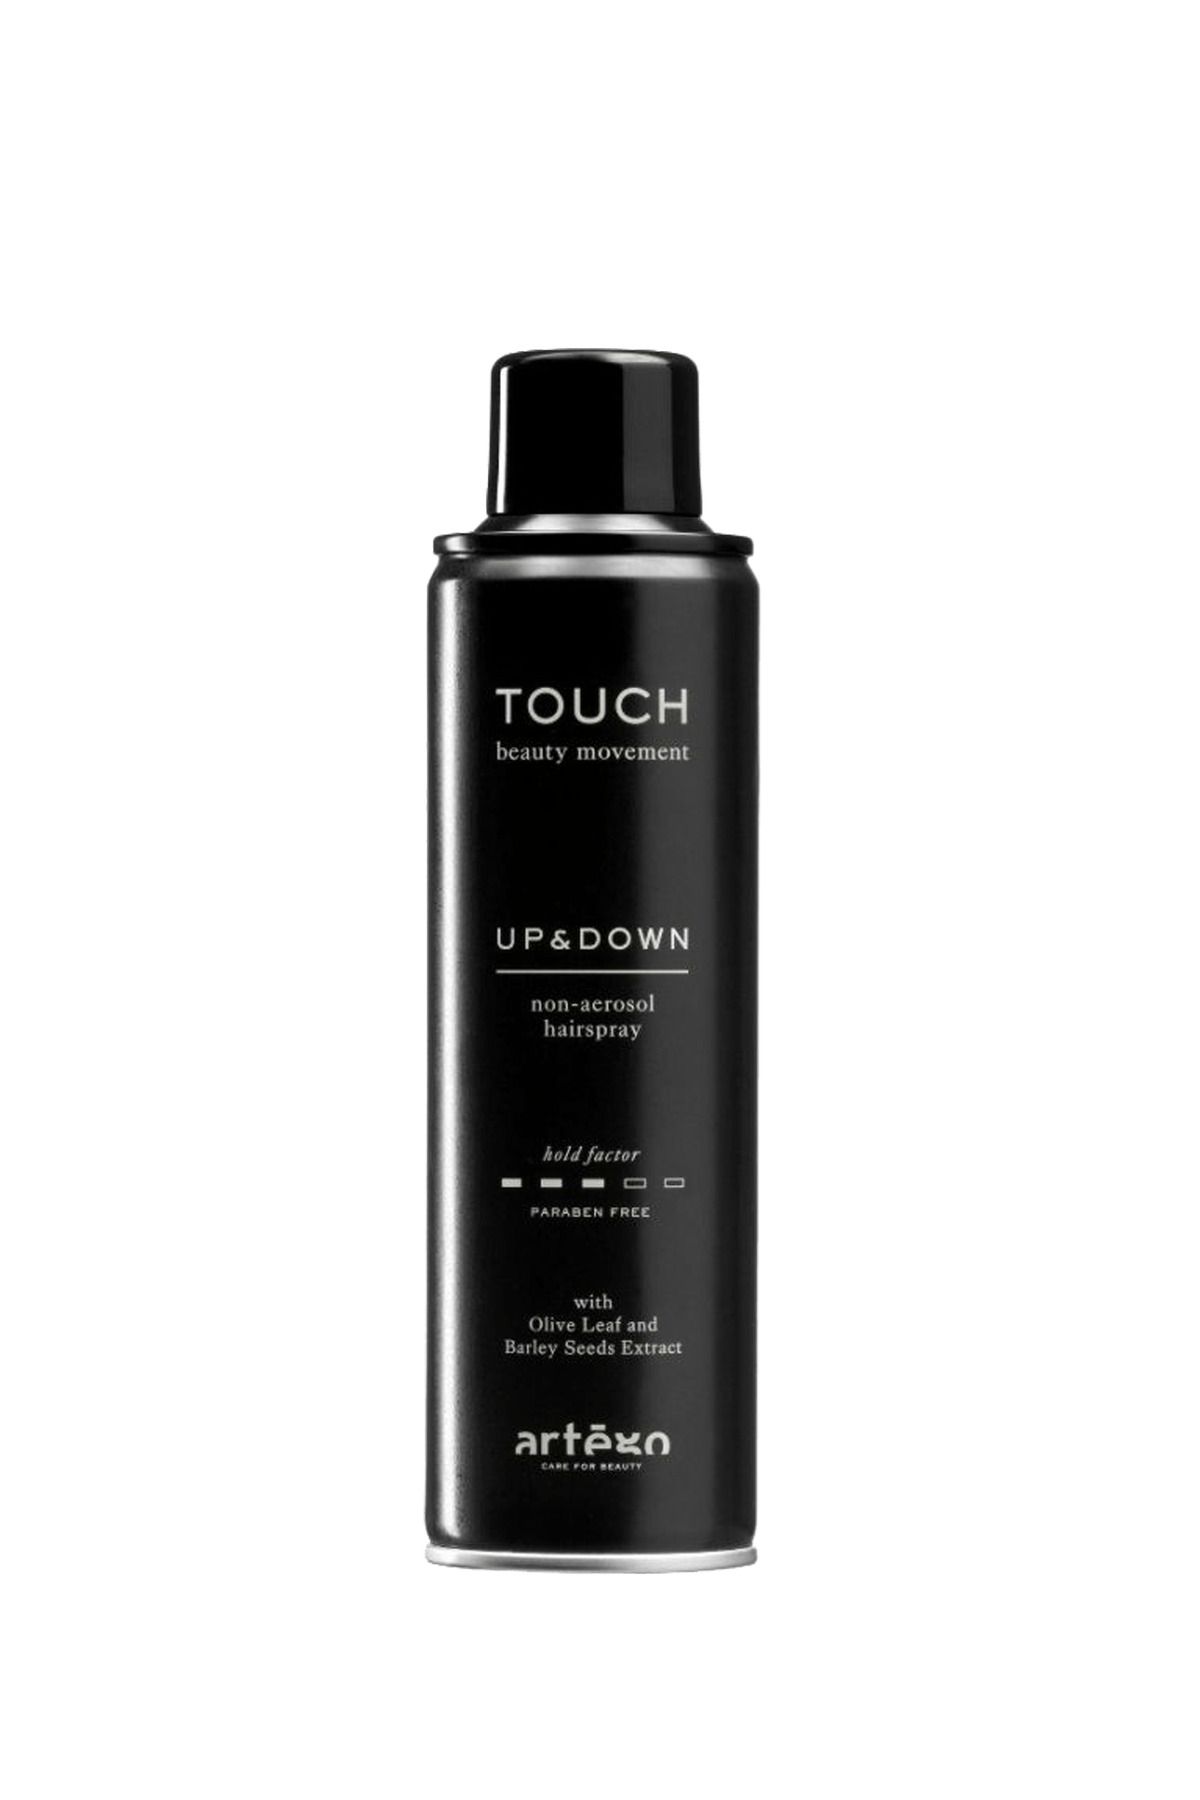 Artego Touch Up And Down Non Aerosol Hairspray 250 ml 8032605270986